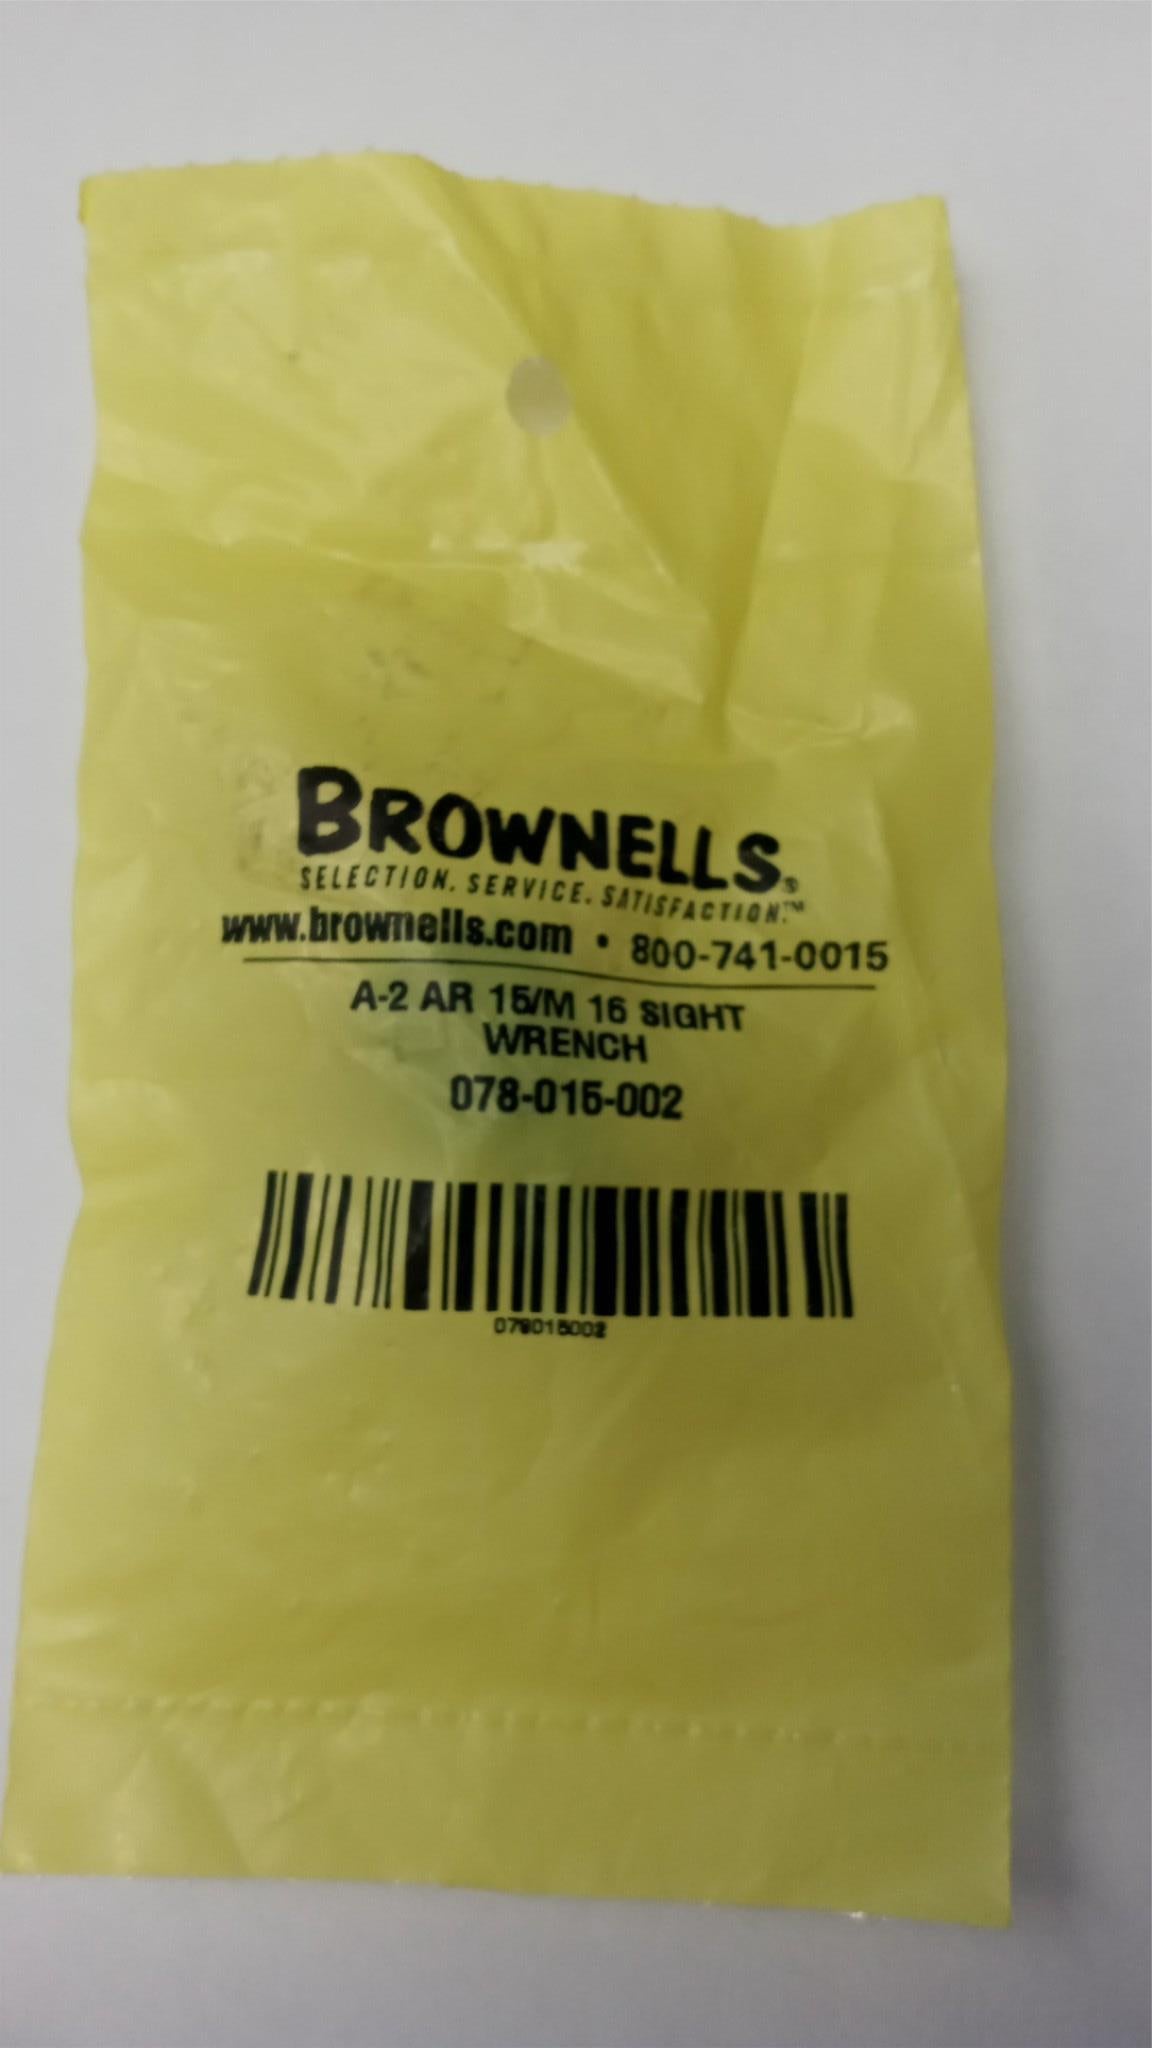 Brownells 078-015-002 Sight Wrench Front Adjustment Tool